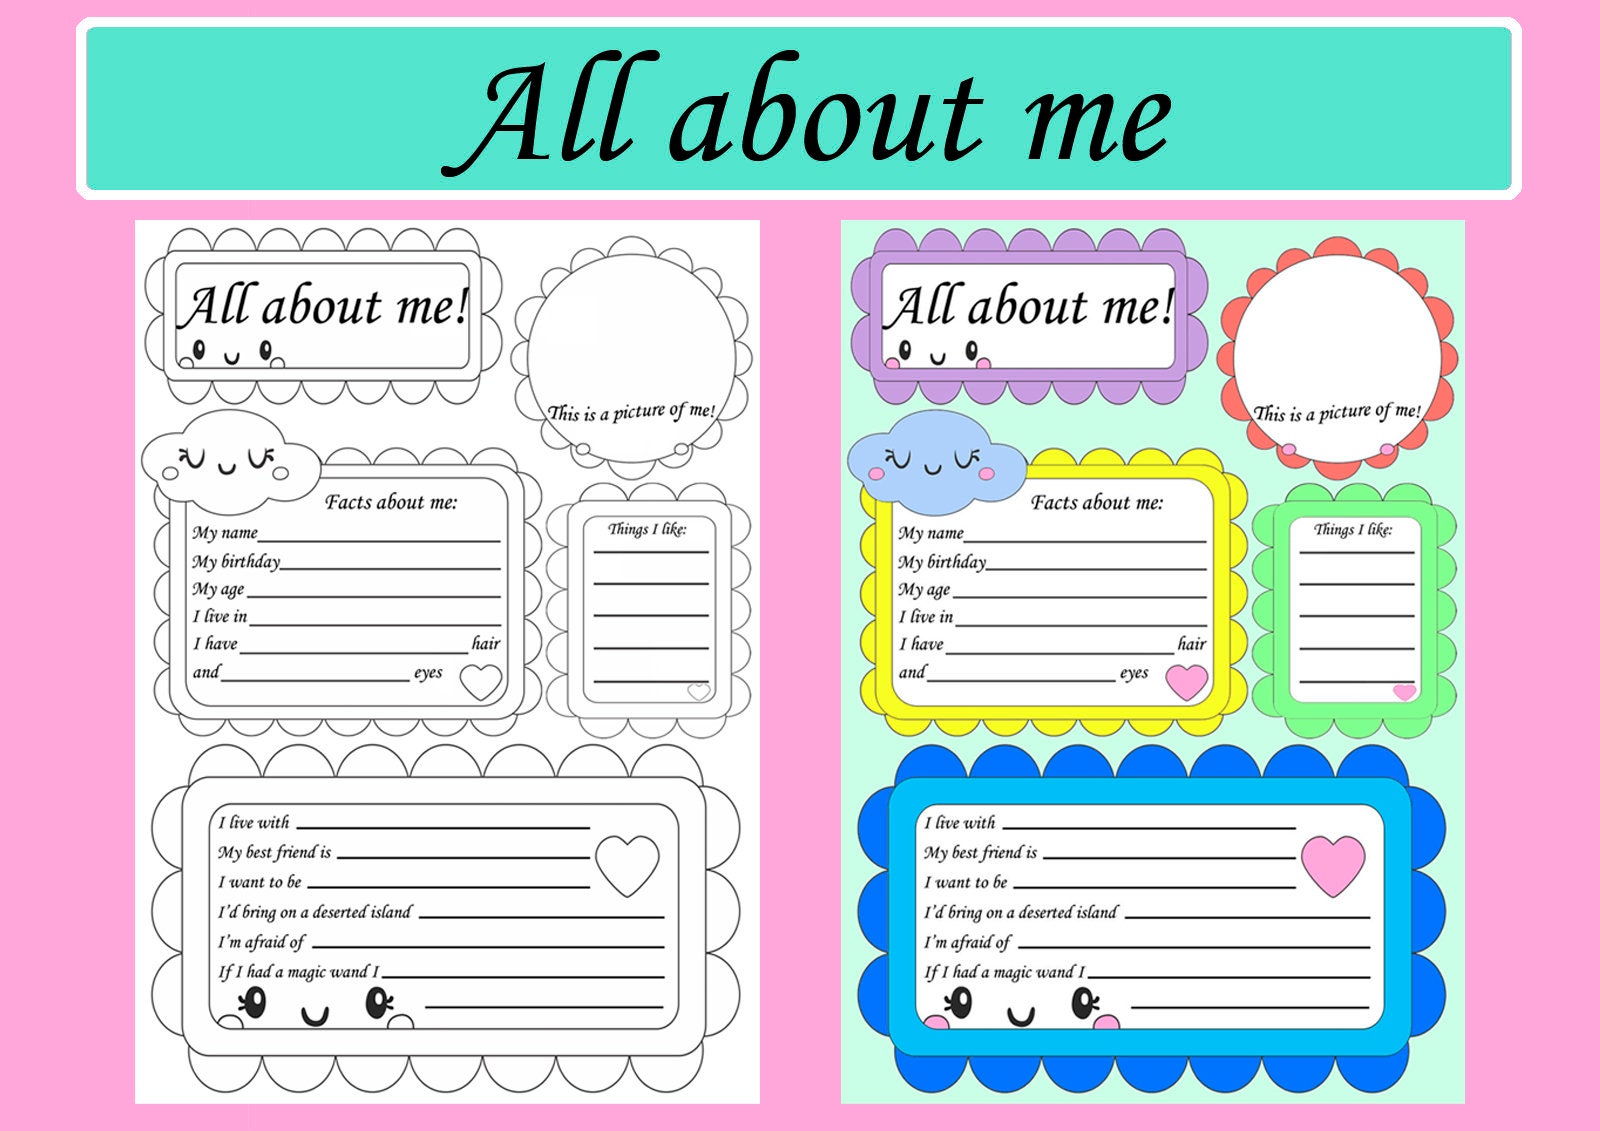 all about me poster printable